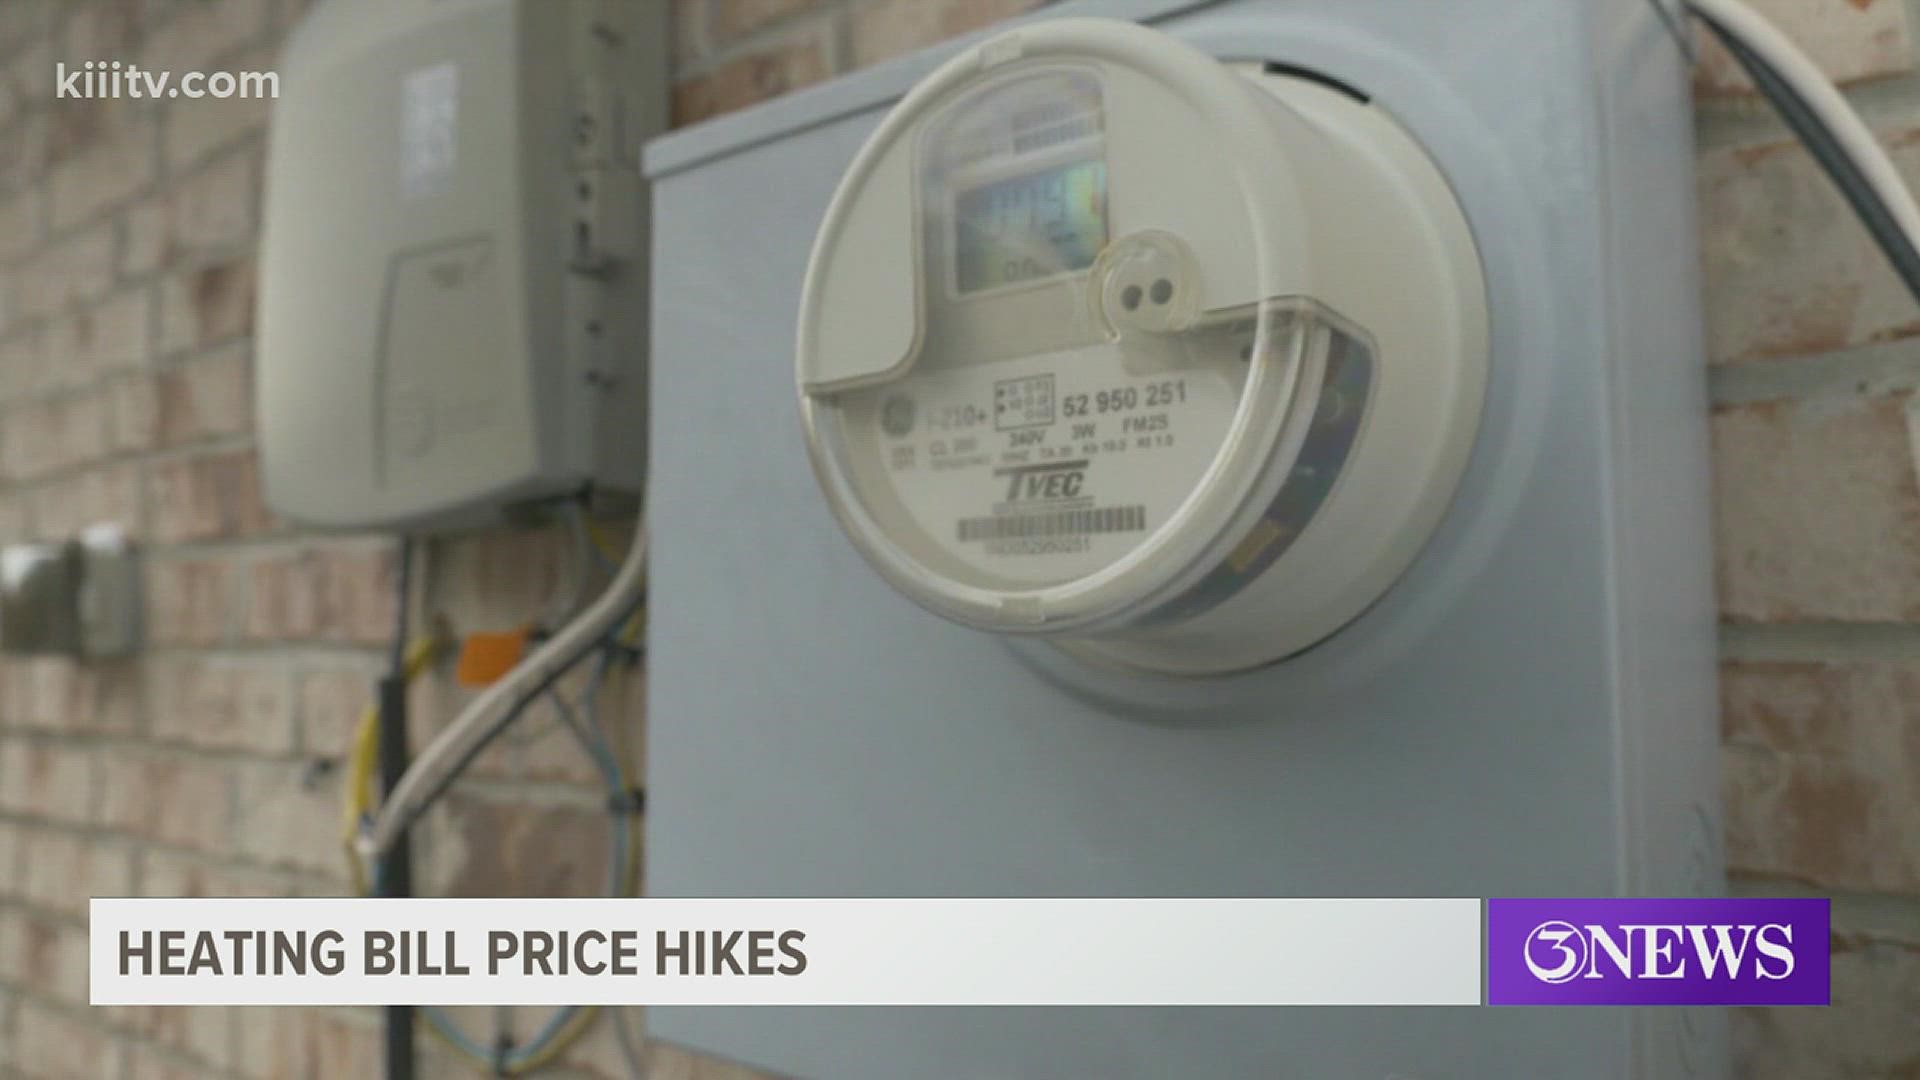 Though gas prices are expected to increase, residents might also notice a spike in their electric bill, since natural gas is used to generate electricity.